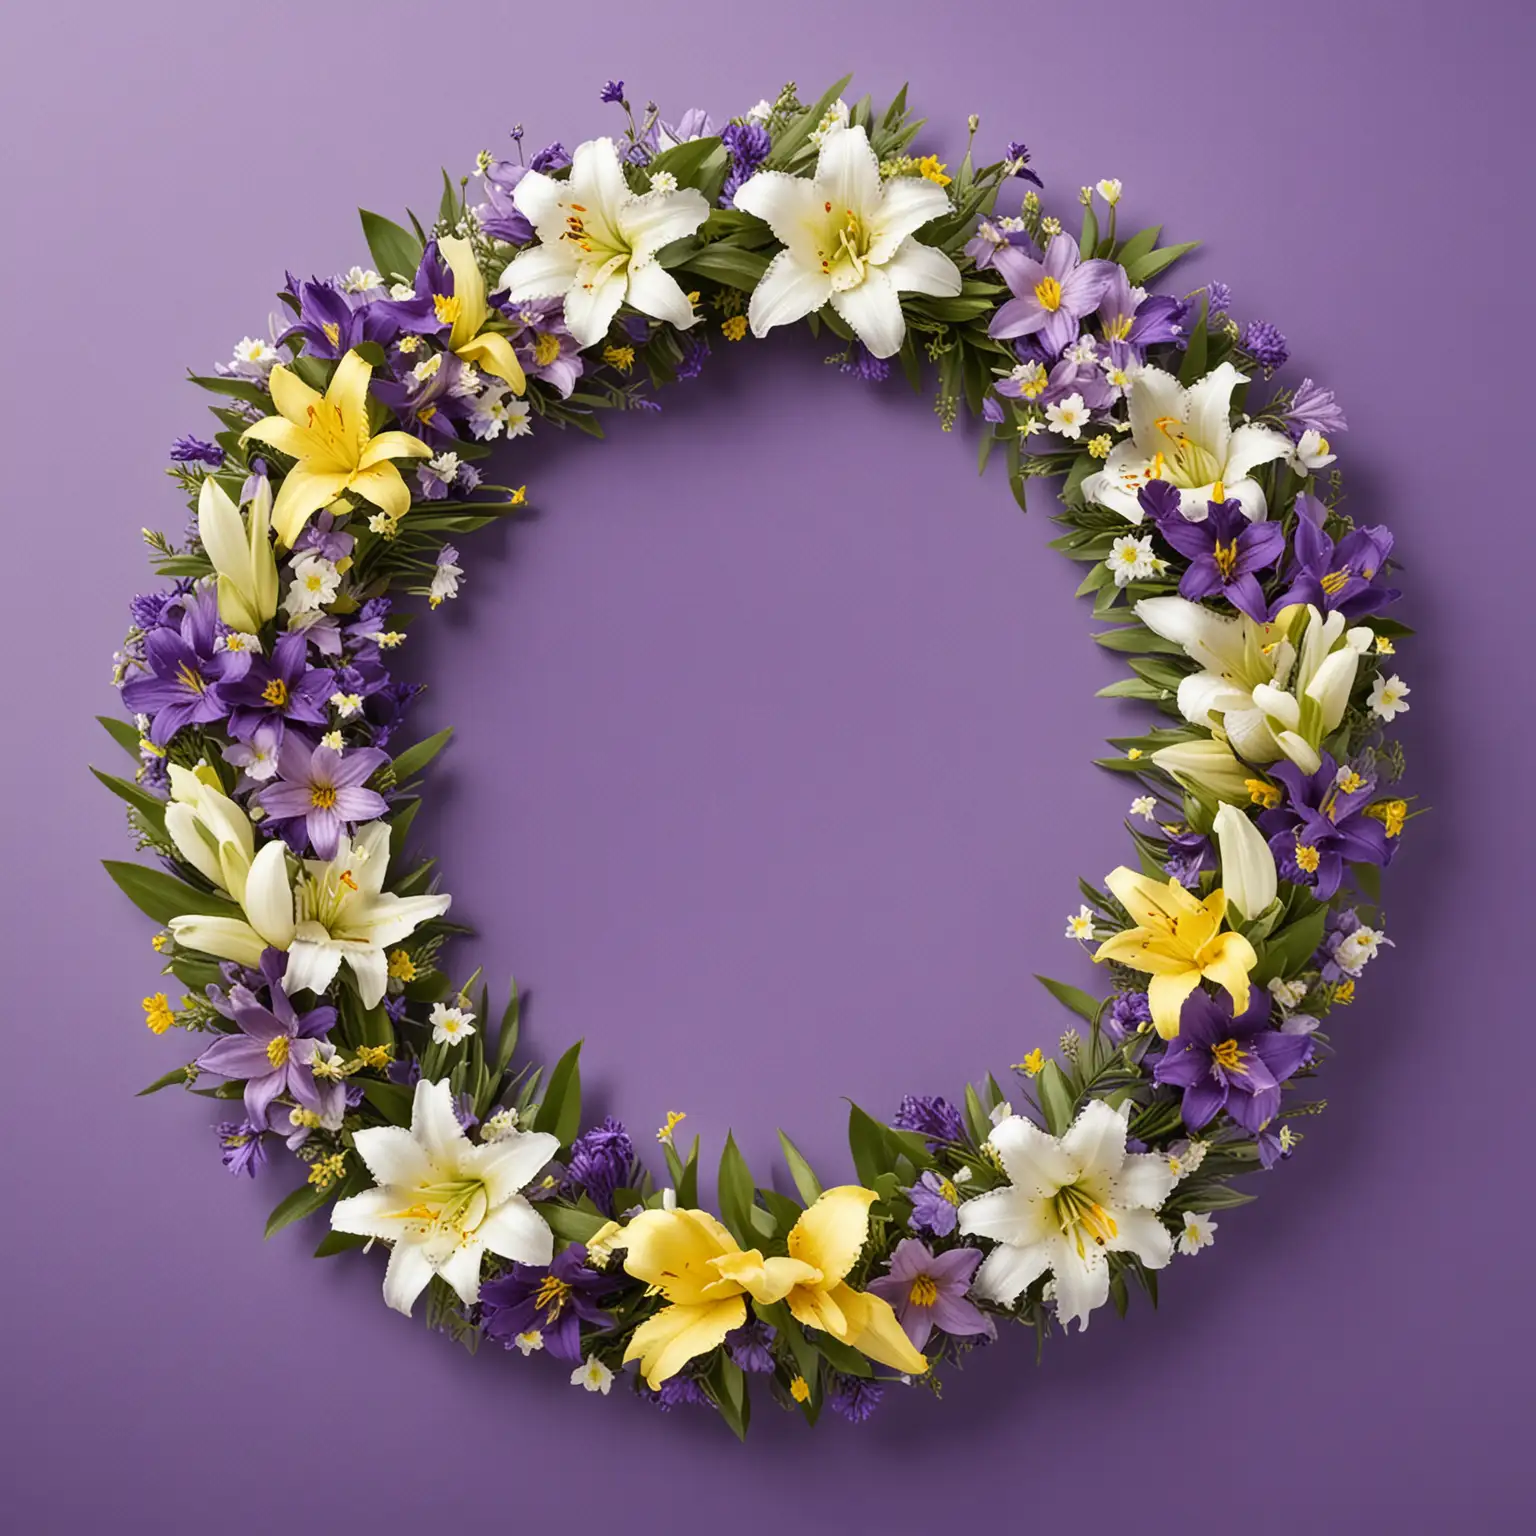 Easter-Card-with-Horizontal-Floral-Wreath-Featuring-Purple-Yellow-and-White-Flowers